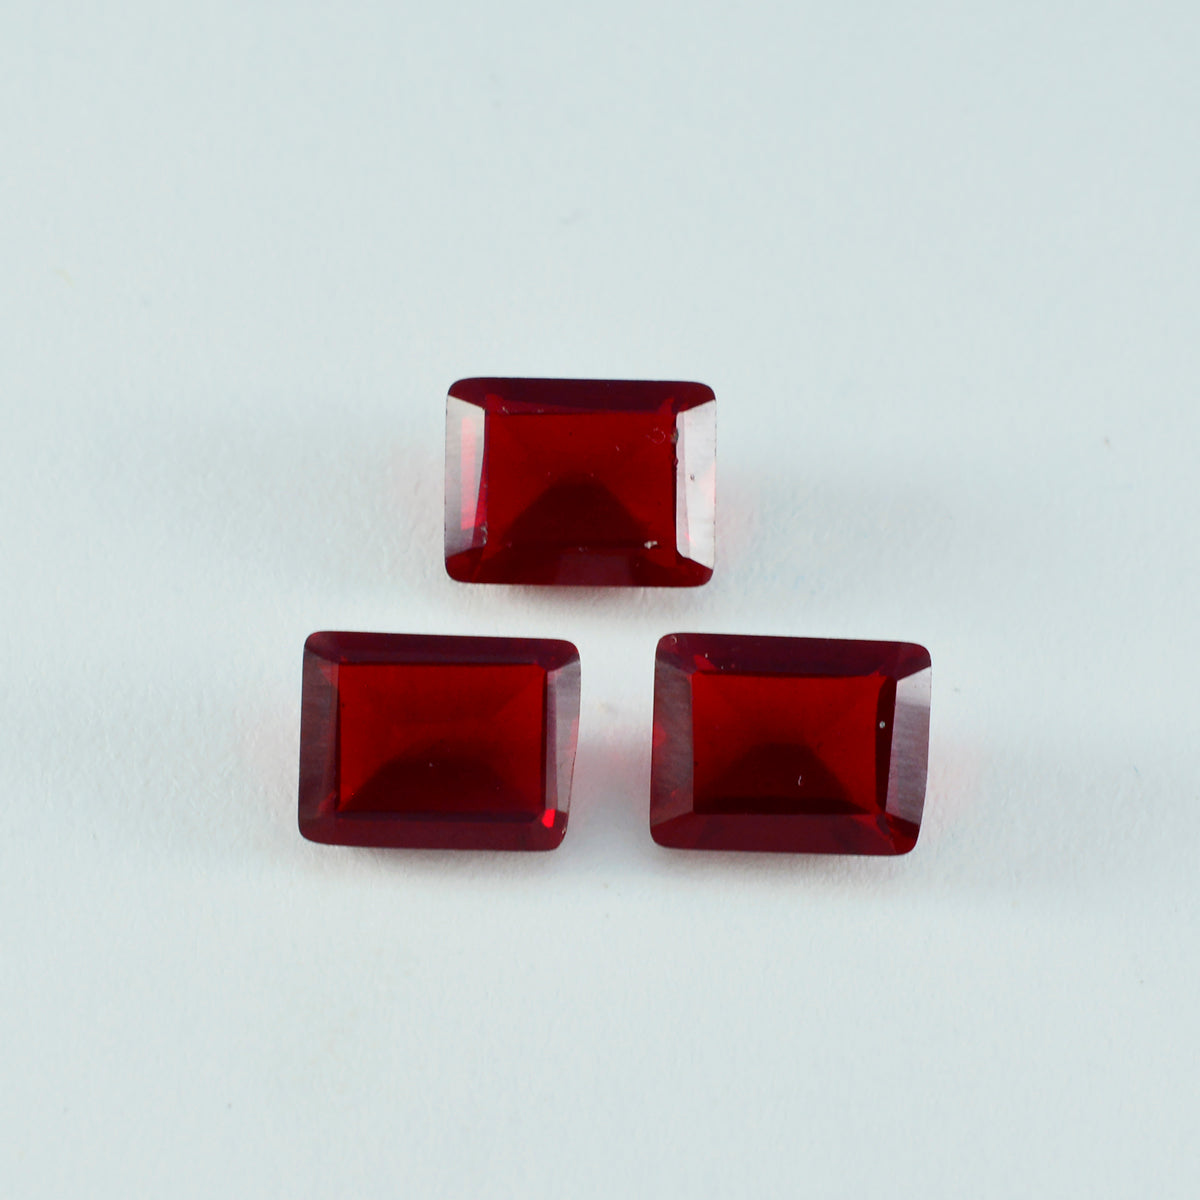 Riyogems 1PC Red Ruby CZ Faceted 10x14 mm Octagon Shape handsome Quality Loose Stone